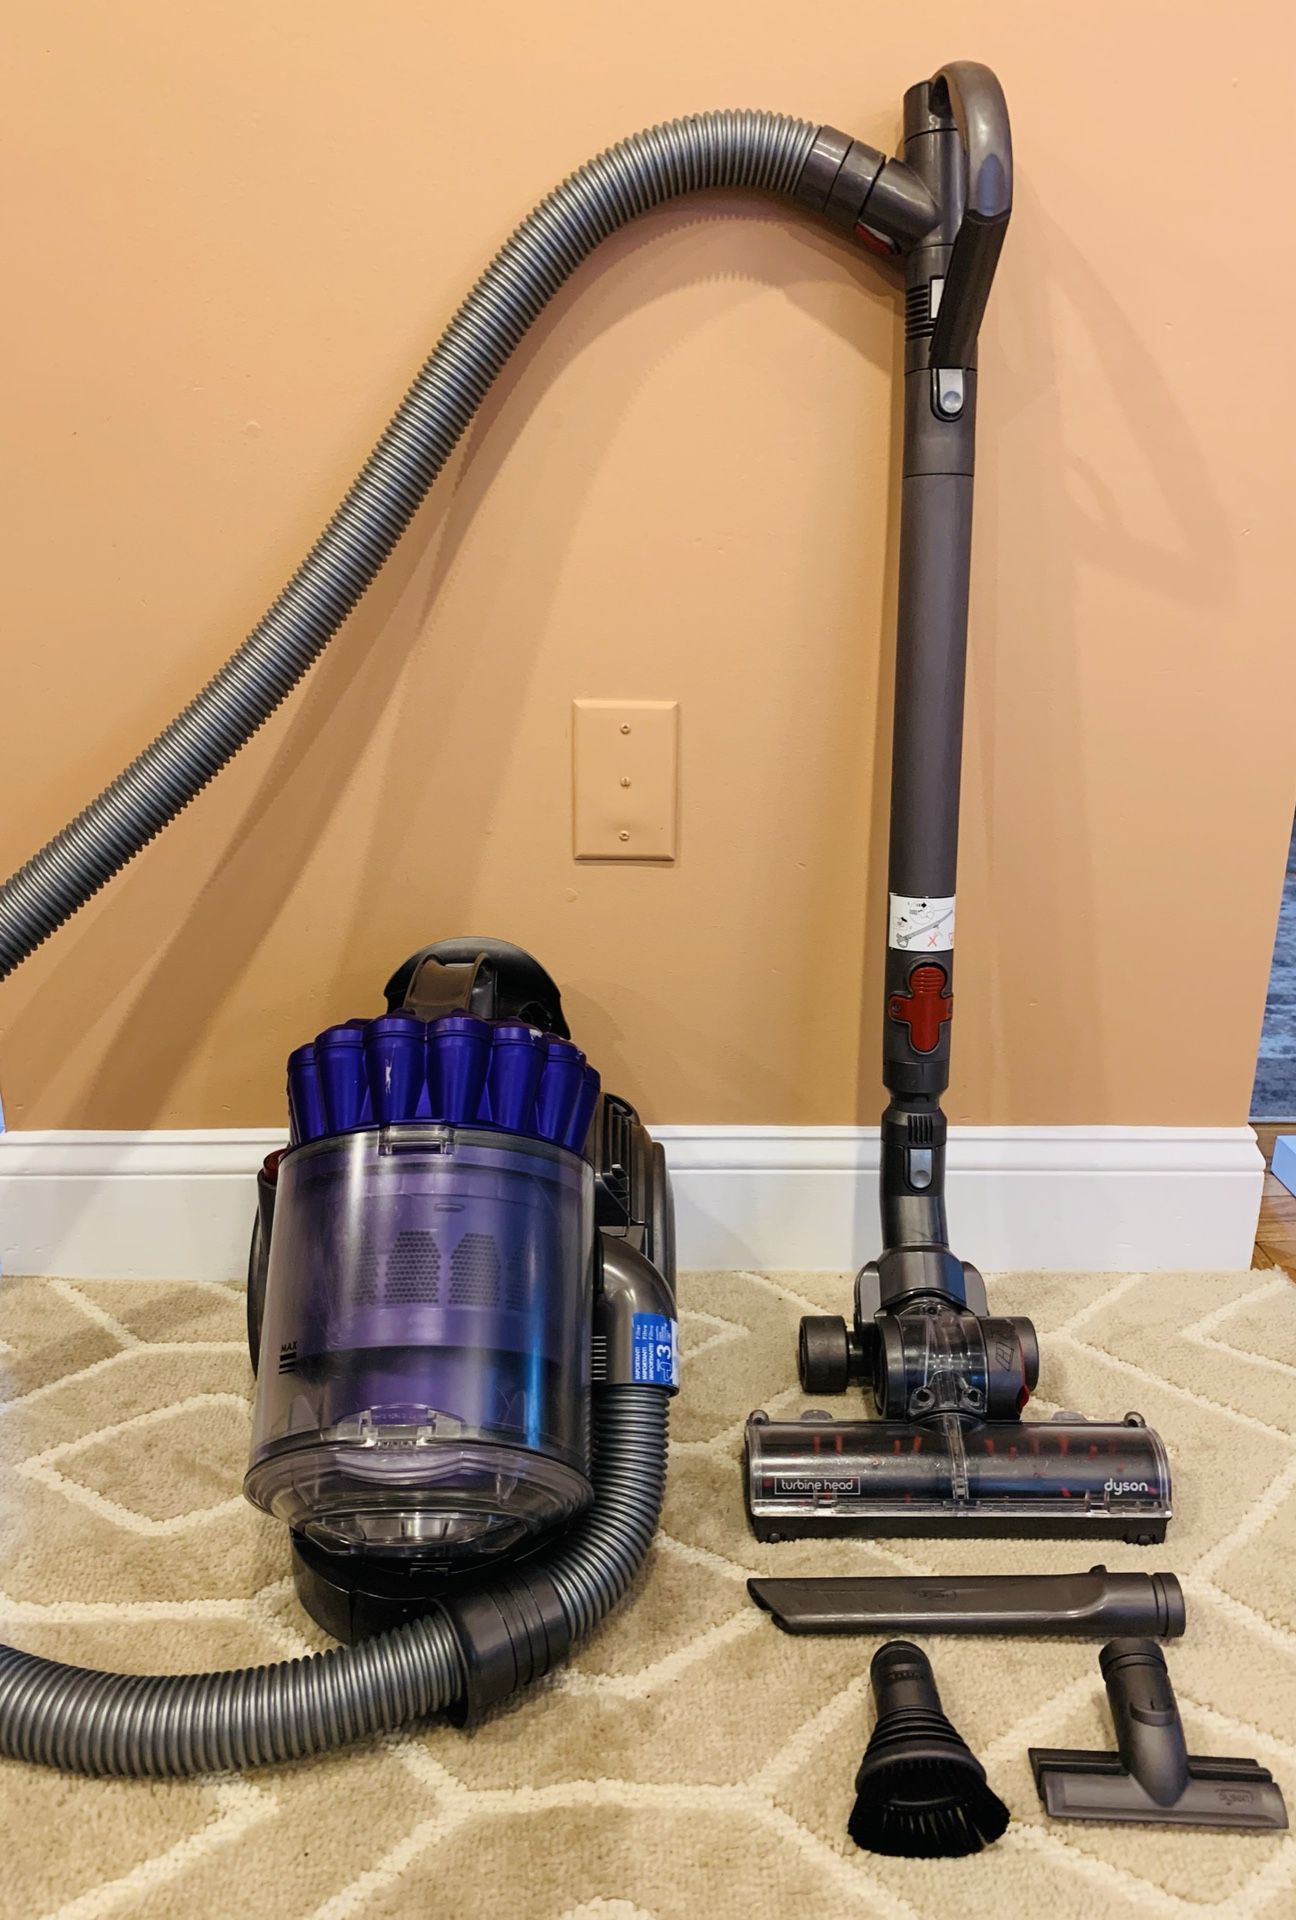 Dyson DC23 animal canister vacuum cleaner